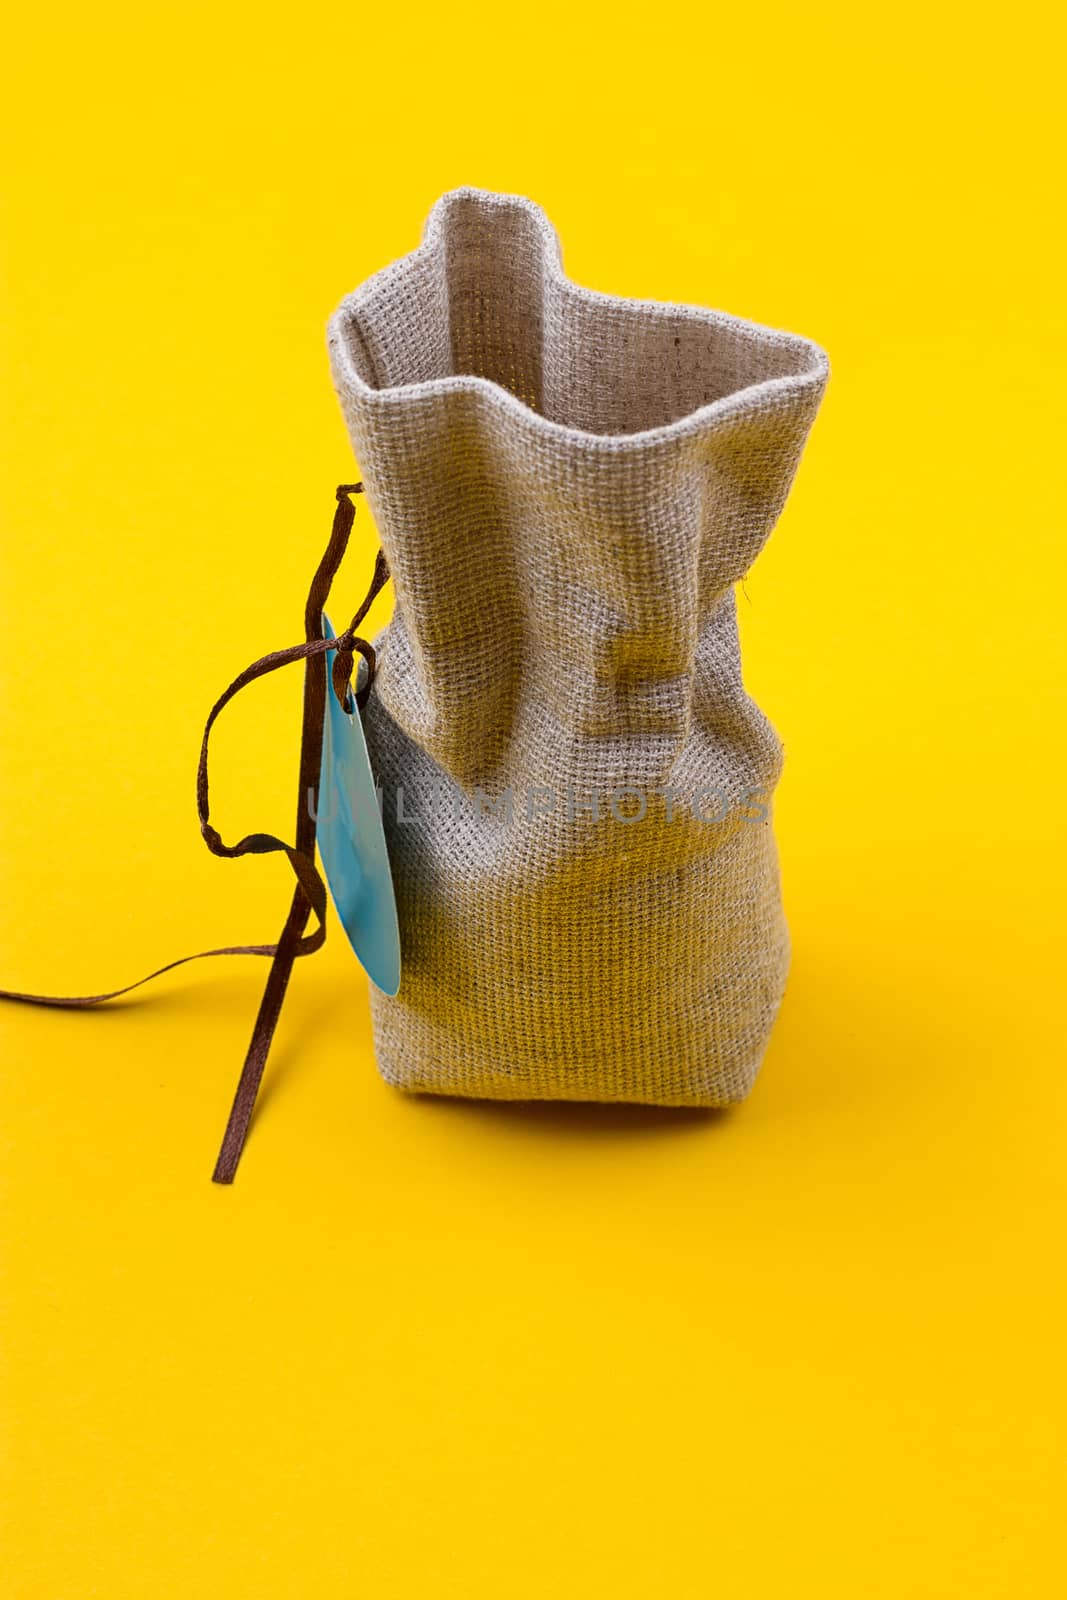 Bag of sackcloth with a blue tag by victosha